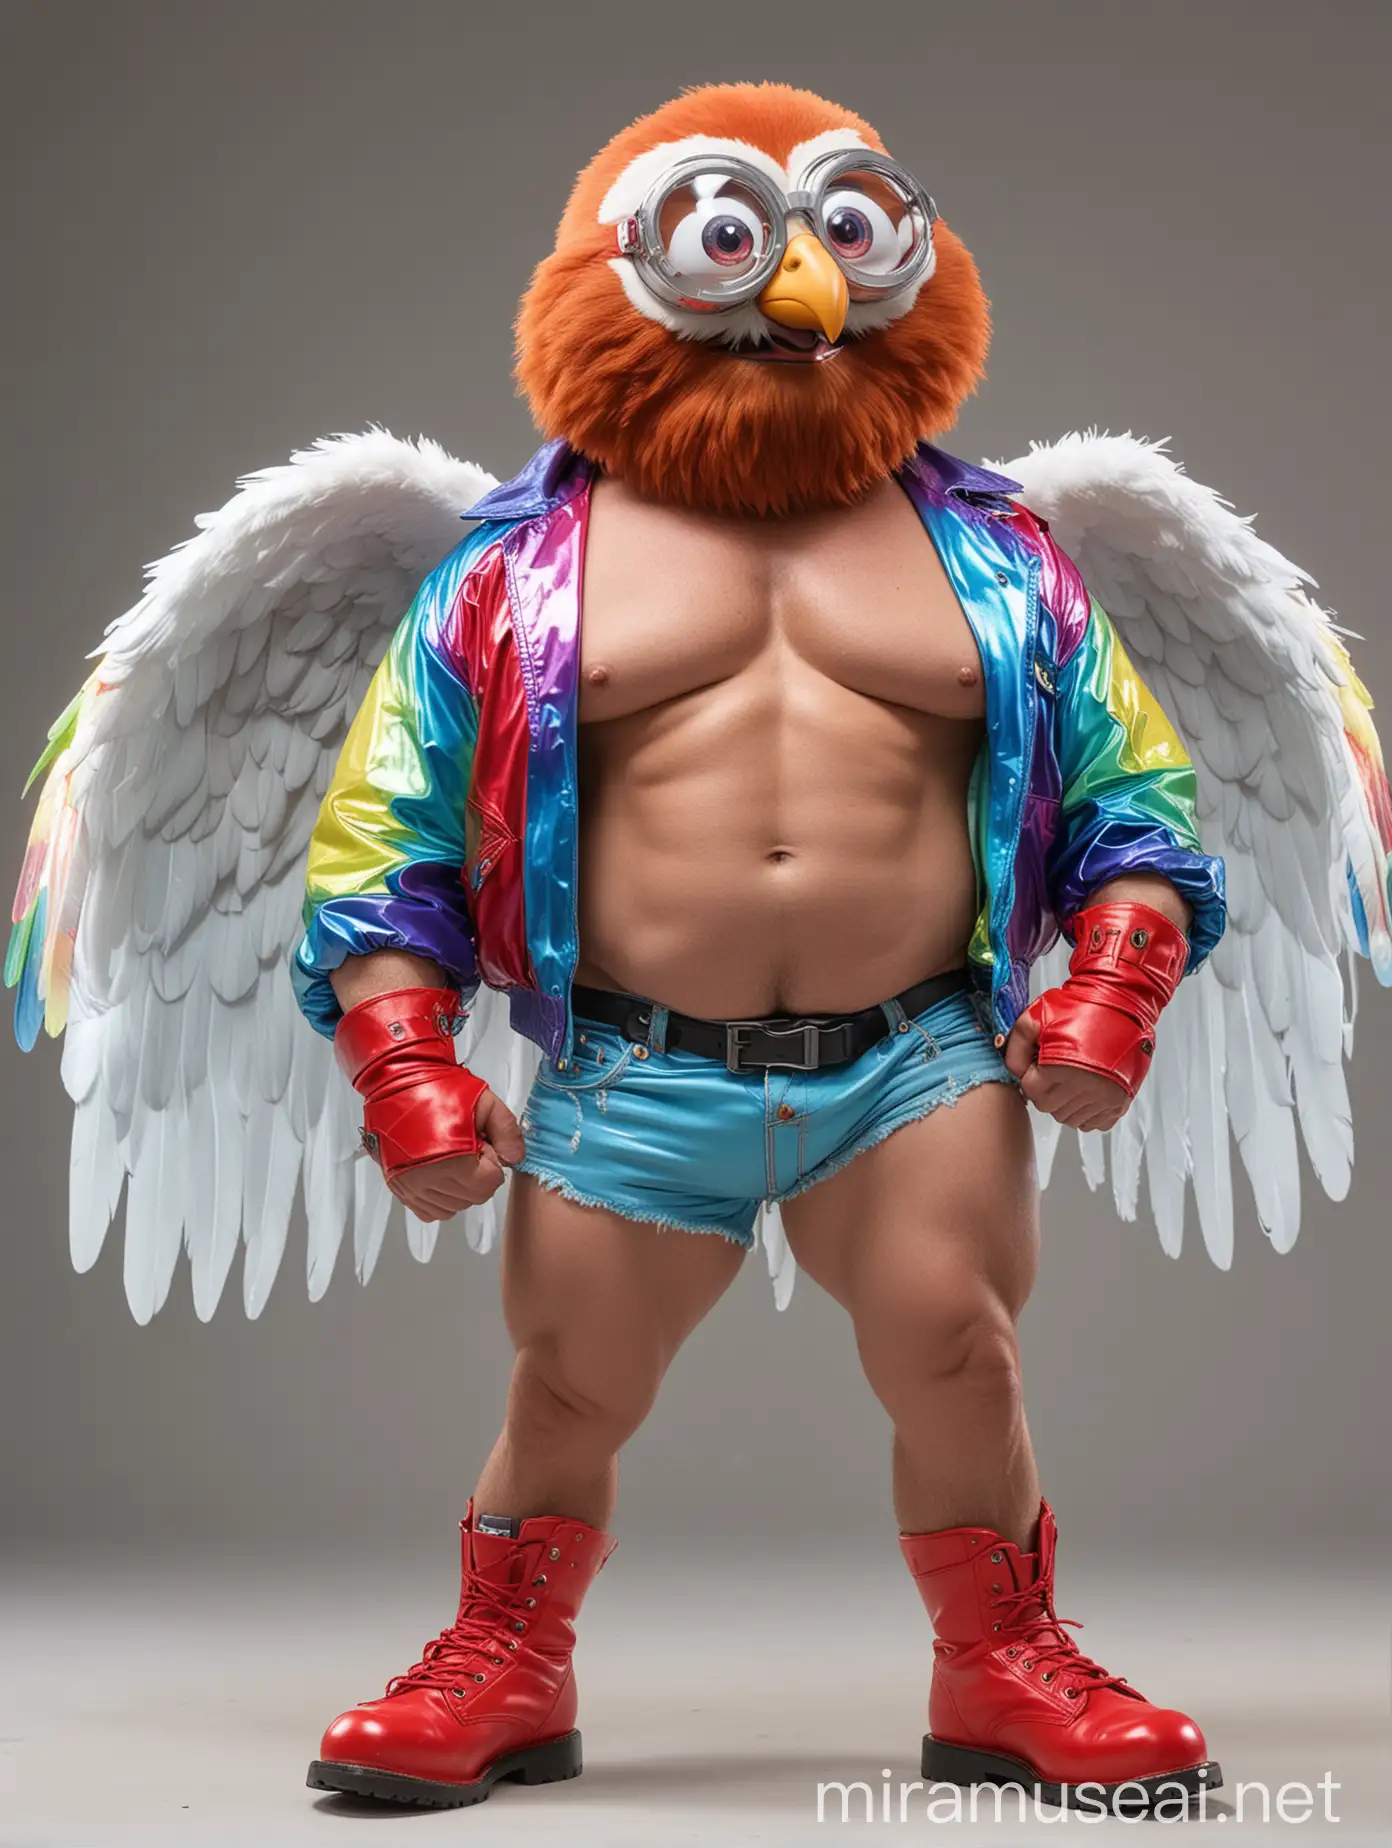 Topless 40s Red Head Bodybuilder with Rainbow Colored Eagle Wings Flexing